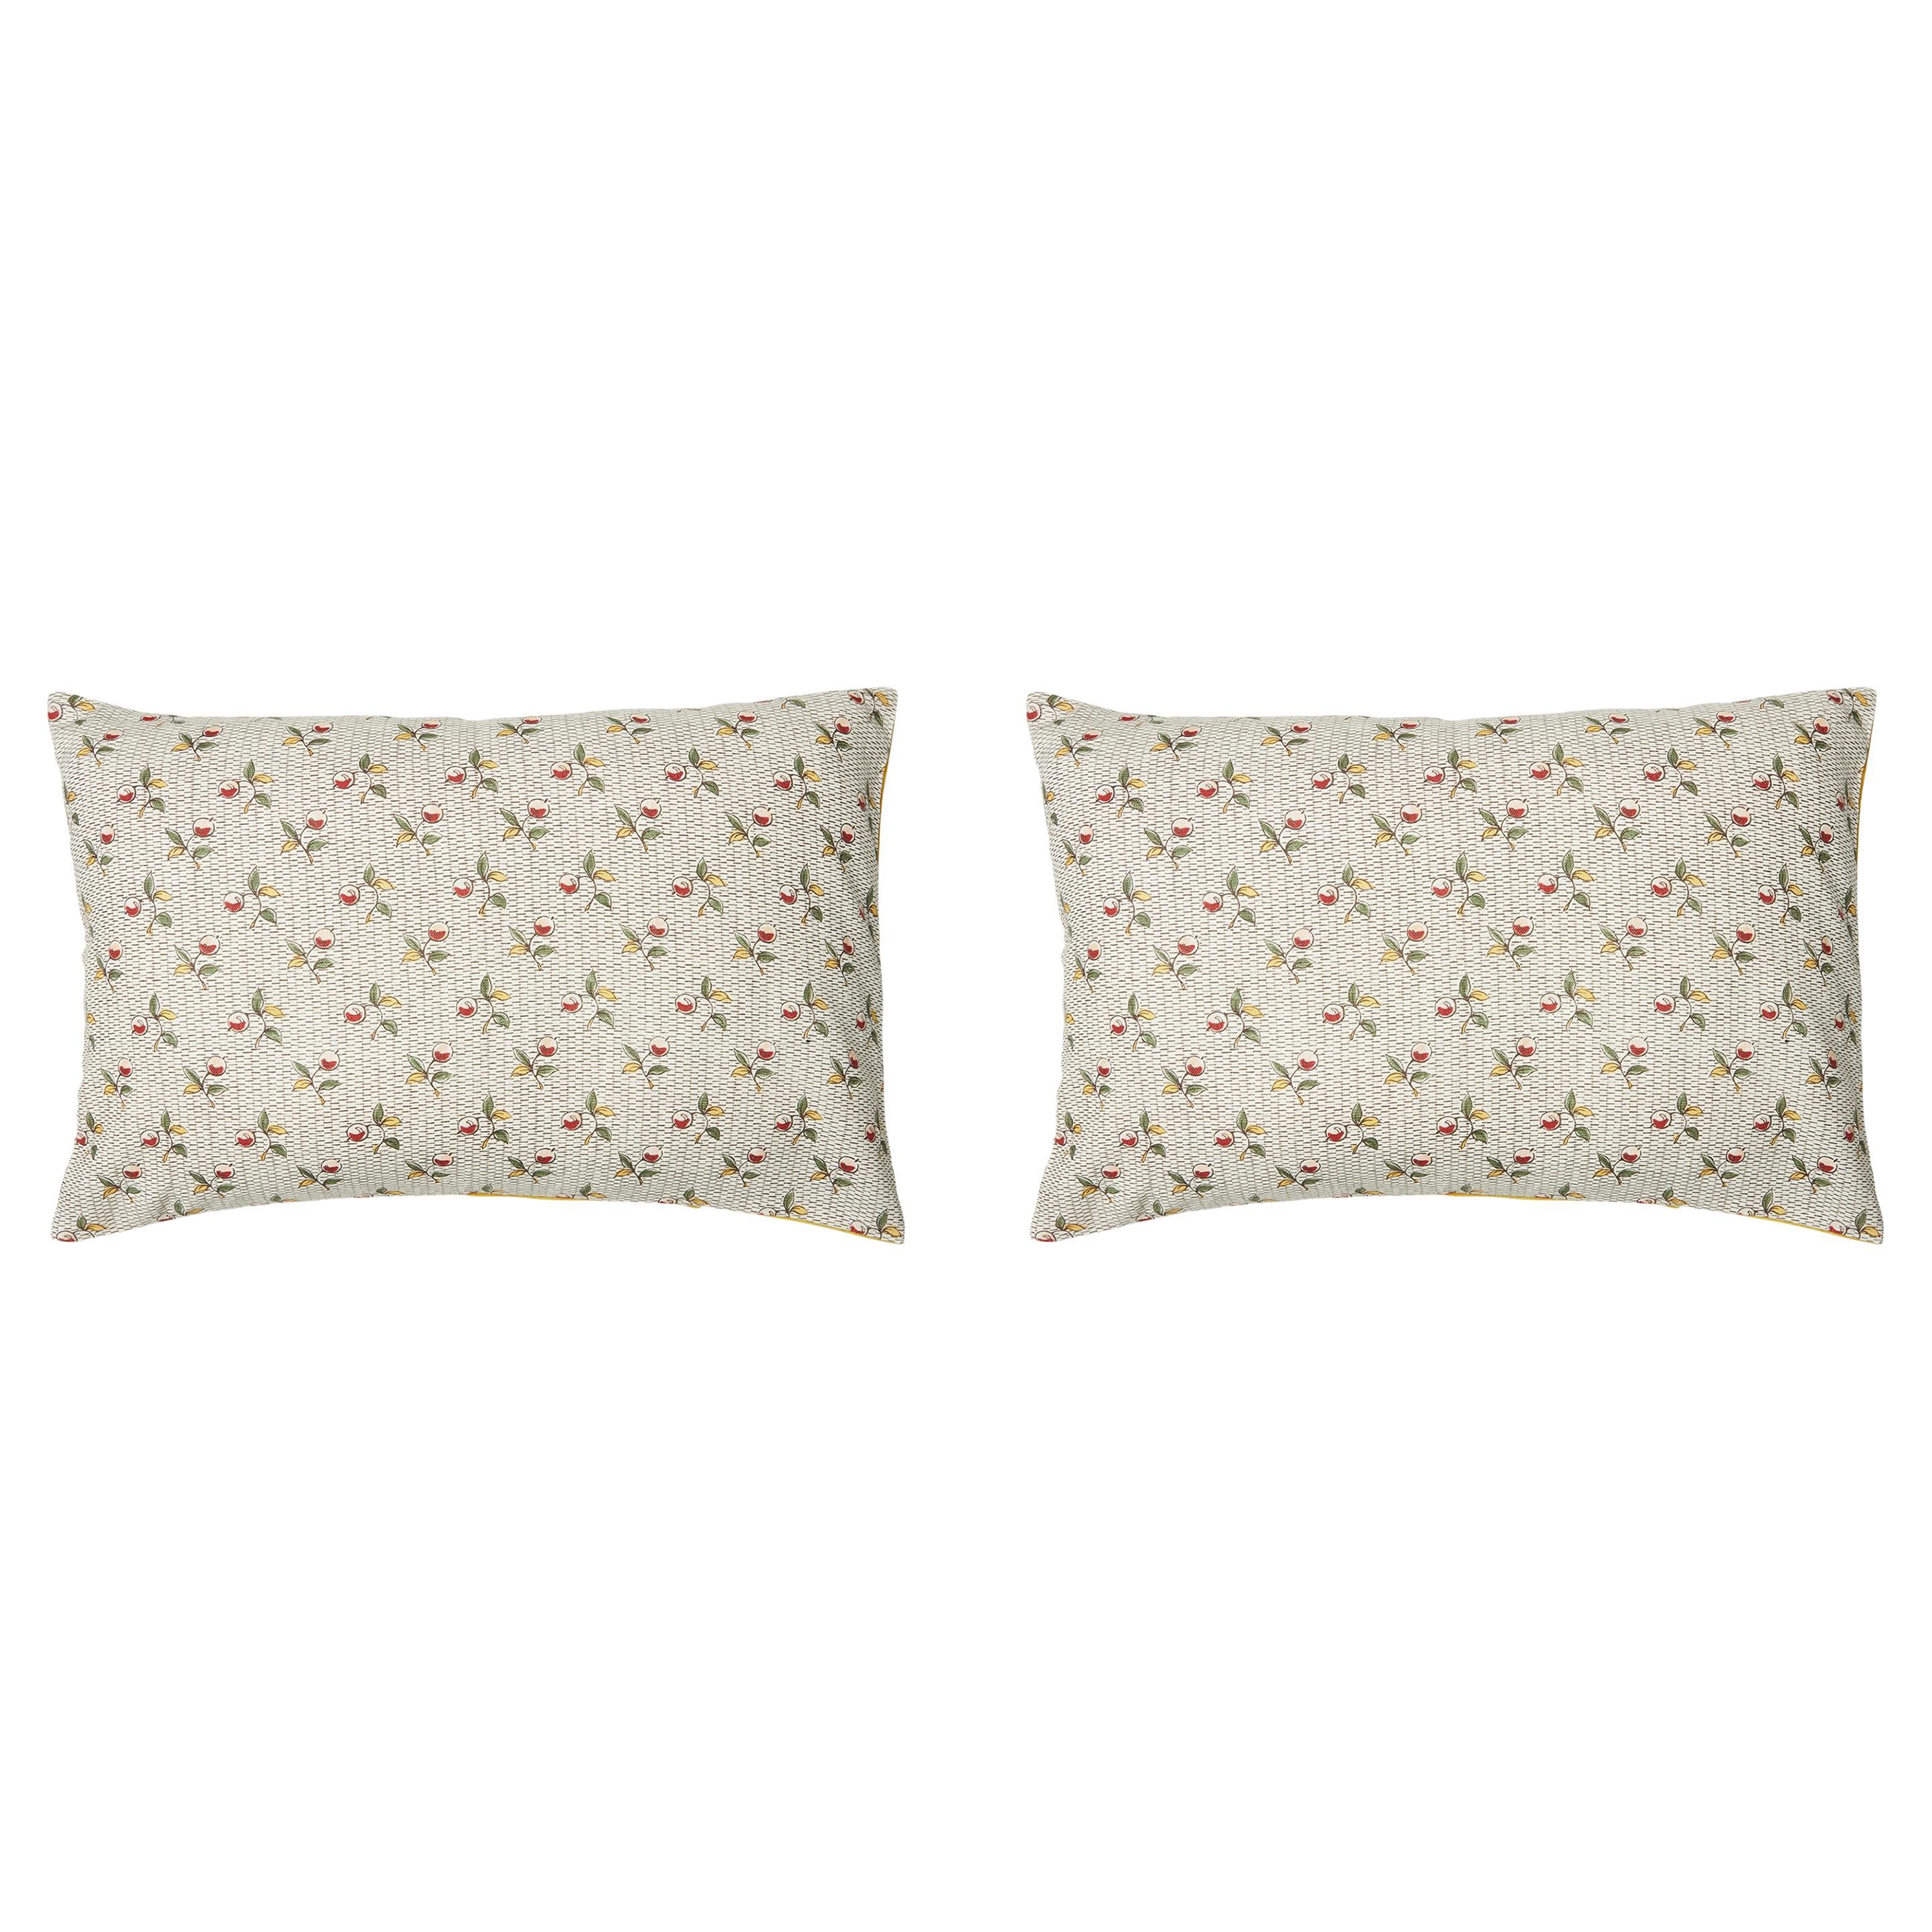 Pair of Linen Pillow Cushions - Baies Pattern - Designed and Made in Paris For Sale